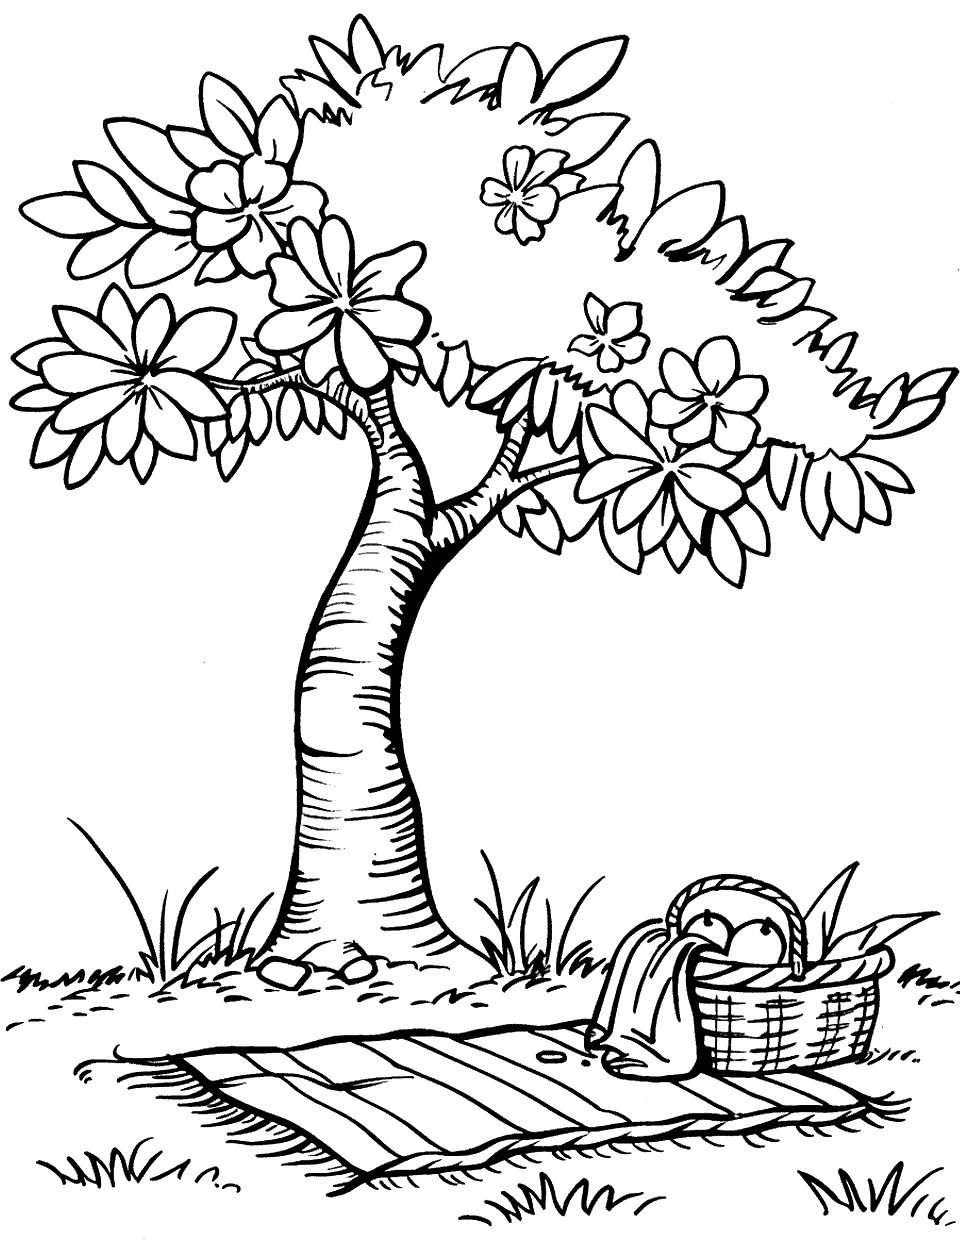 Spring Picnic Under a Tree Coloring Page - A picnic blanket and basket under a tree in full spring bloom.